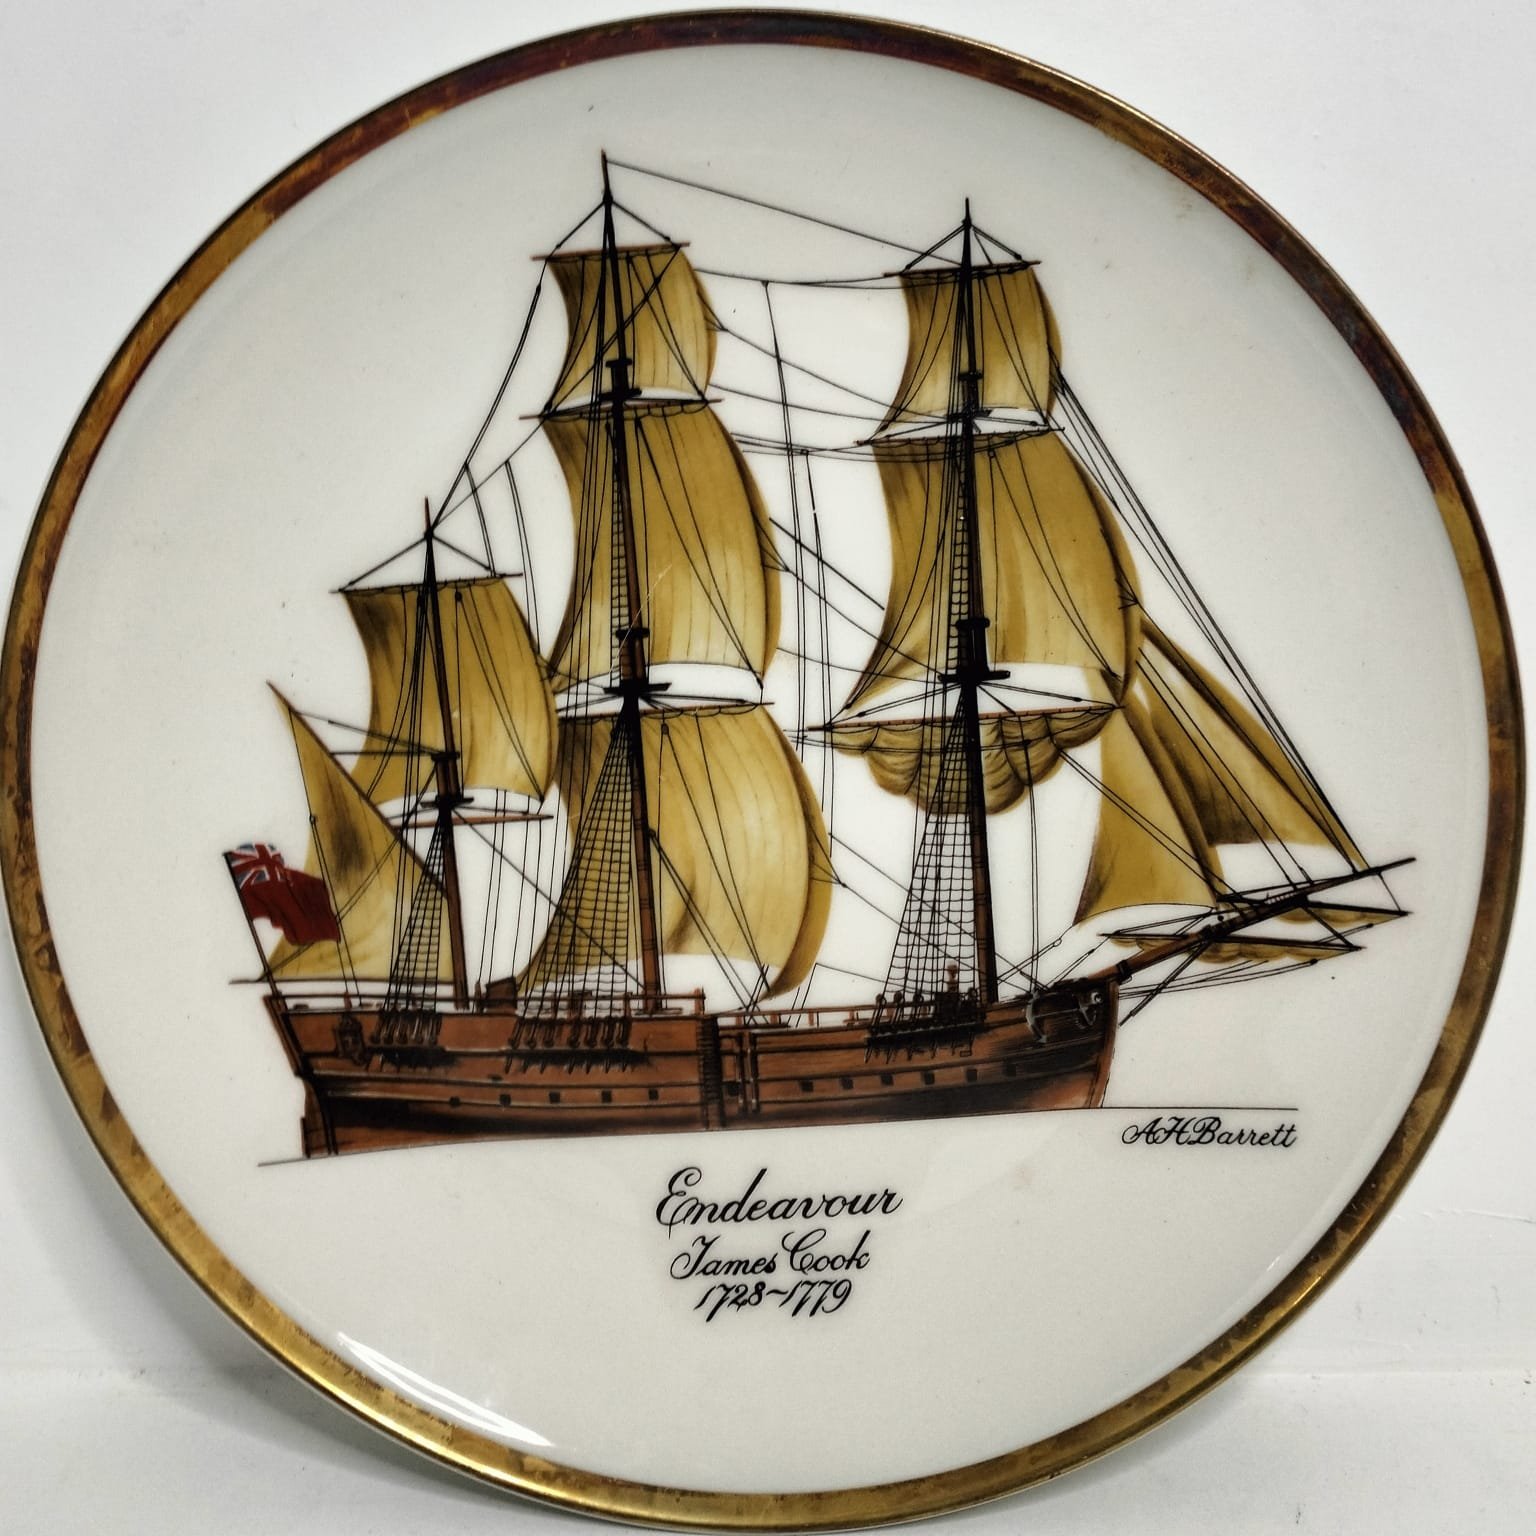 Heritage Porcelain collectable ship plate